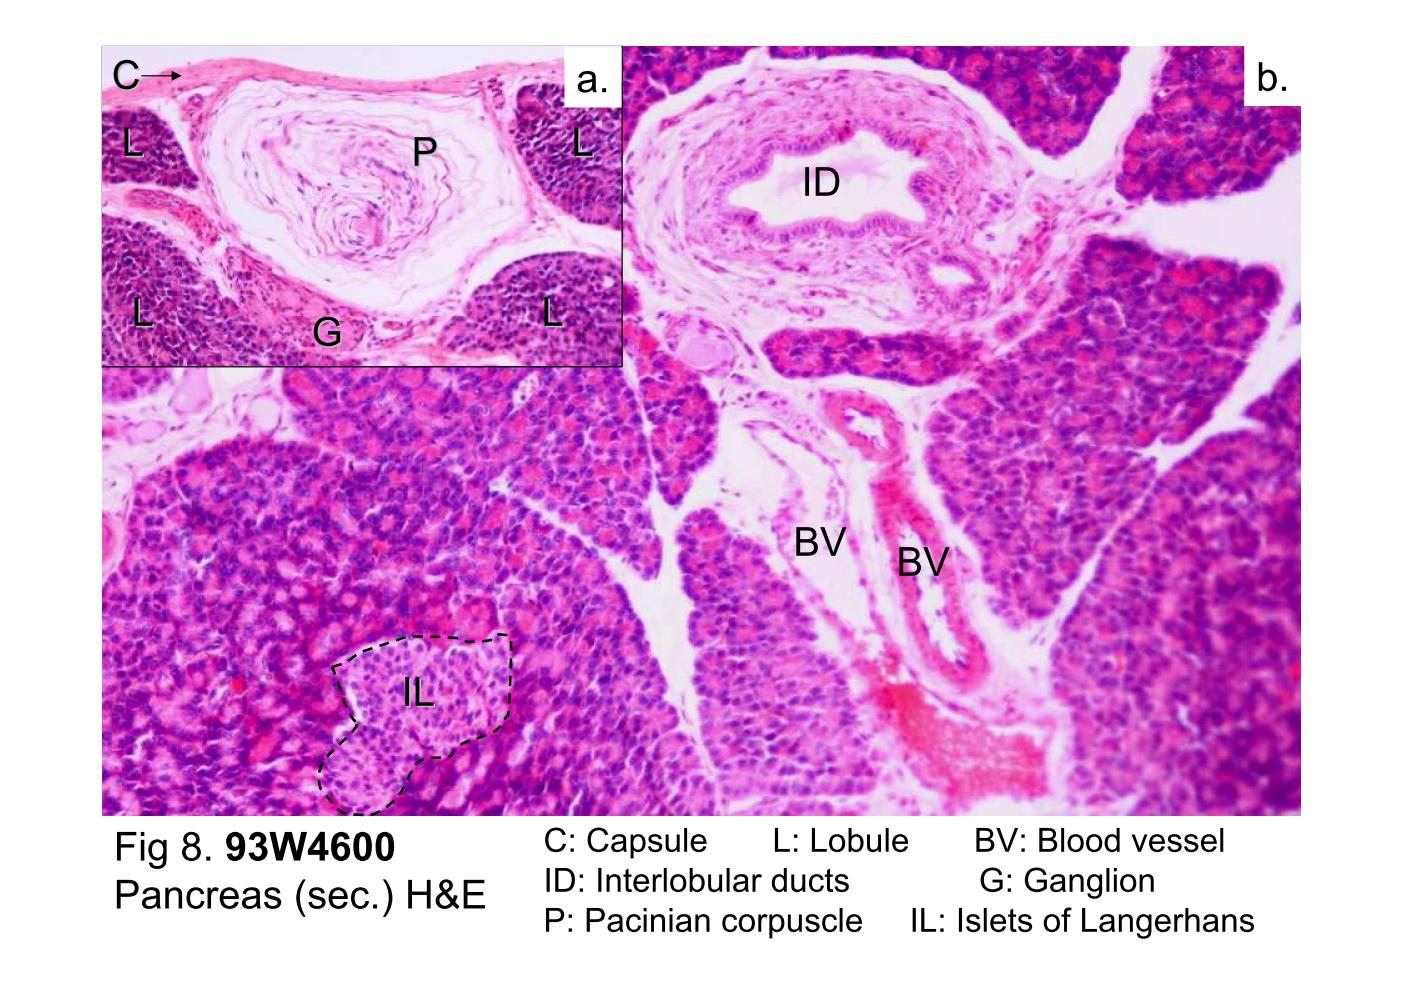 block10-2_19.jpg - Fig 8. 93W4600, Pancreas (sec.) H&E.The pancreas is surrounded by a delicate capsule (C) ofmoderately dense connective tissue. Septa from the capsuledivide the pancreas into lobules (L). Larger blood vessels (BV)and interlobular ducts (ID) travel in the connective tissue septa.Ganglion (G) and Pacinian corpuscle (P) can also be found inthis slide.Pancreas is a mixed gland containing both an exocrinecomponent (pancreatic acini) and an endocrine component(islet of Langerhans, IL), that have distinctive characteristics.Within the lobule are the numerous pancreatic acini, anintralobular duct, intercalated ducts [not readily evident at thislow magnification], and islet of Langerhans.